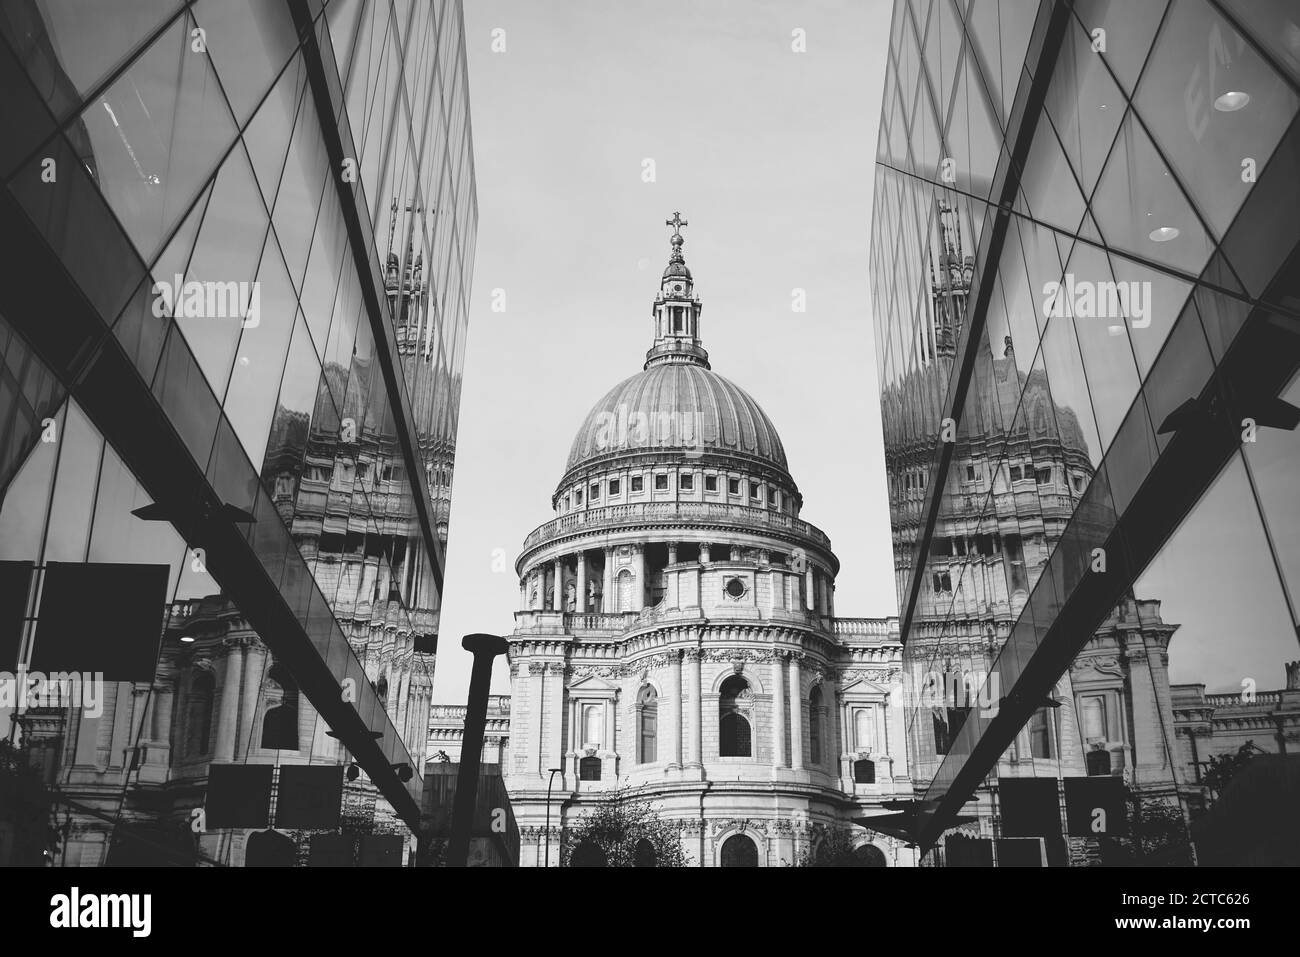 Black and white photo of Saint Paul Cathedral reflected in modern glass walls in City of London, England Stock Photo